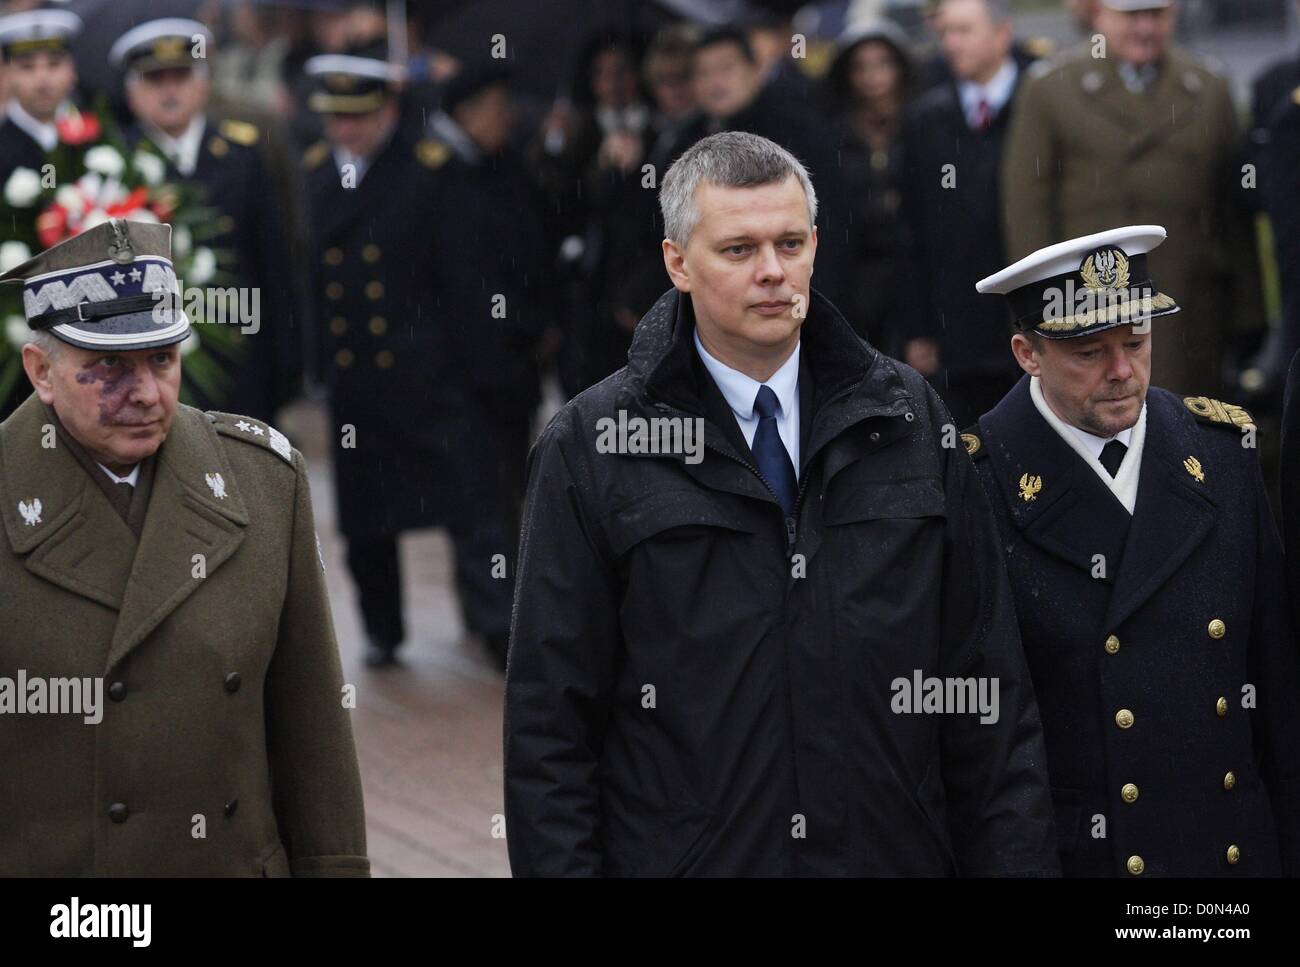 Gdynia, Poland 28th, November 2012  94th anniversary of Polish Navy reneval by the Marshal Jozef Pilsudski in 1918. Minister of Defence Tomasz Siemoniak (C) takes part in the ceremony in front of Polish Navy Sailor Plaque in Gdynia. Stock Photo